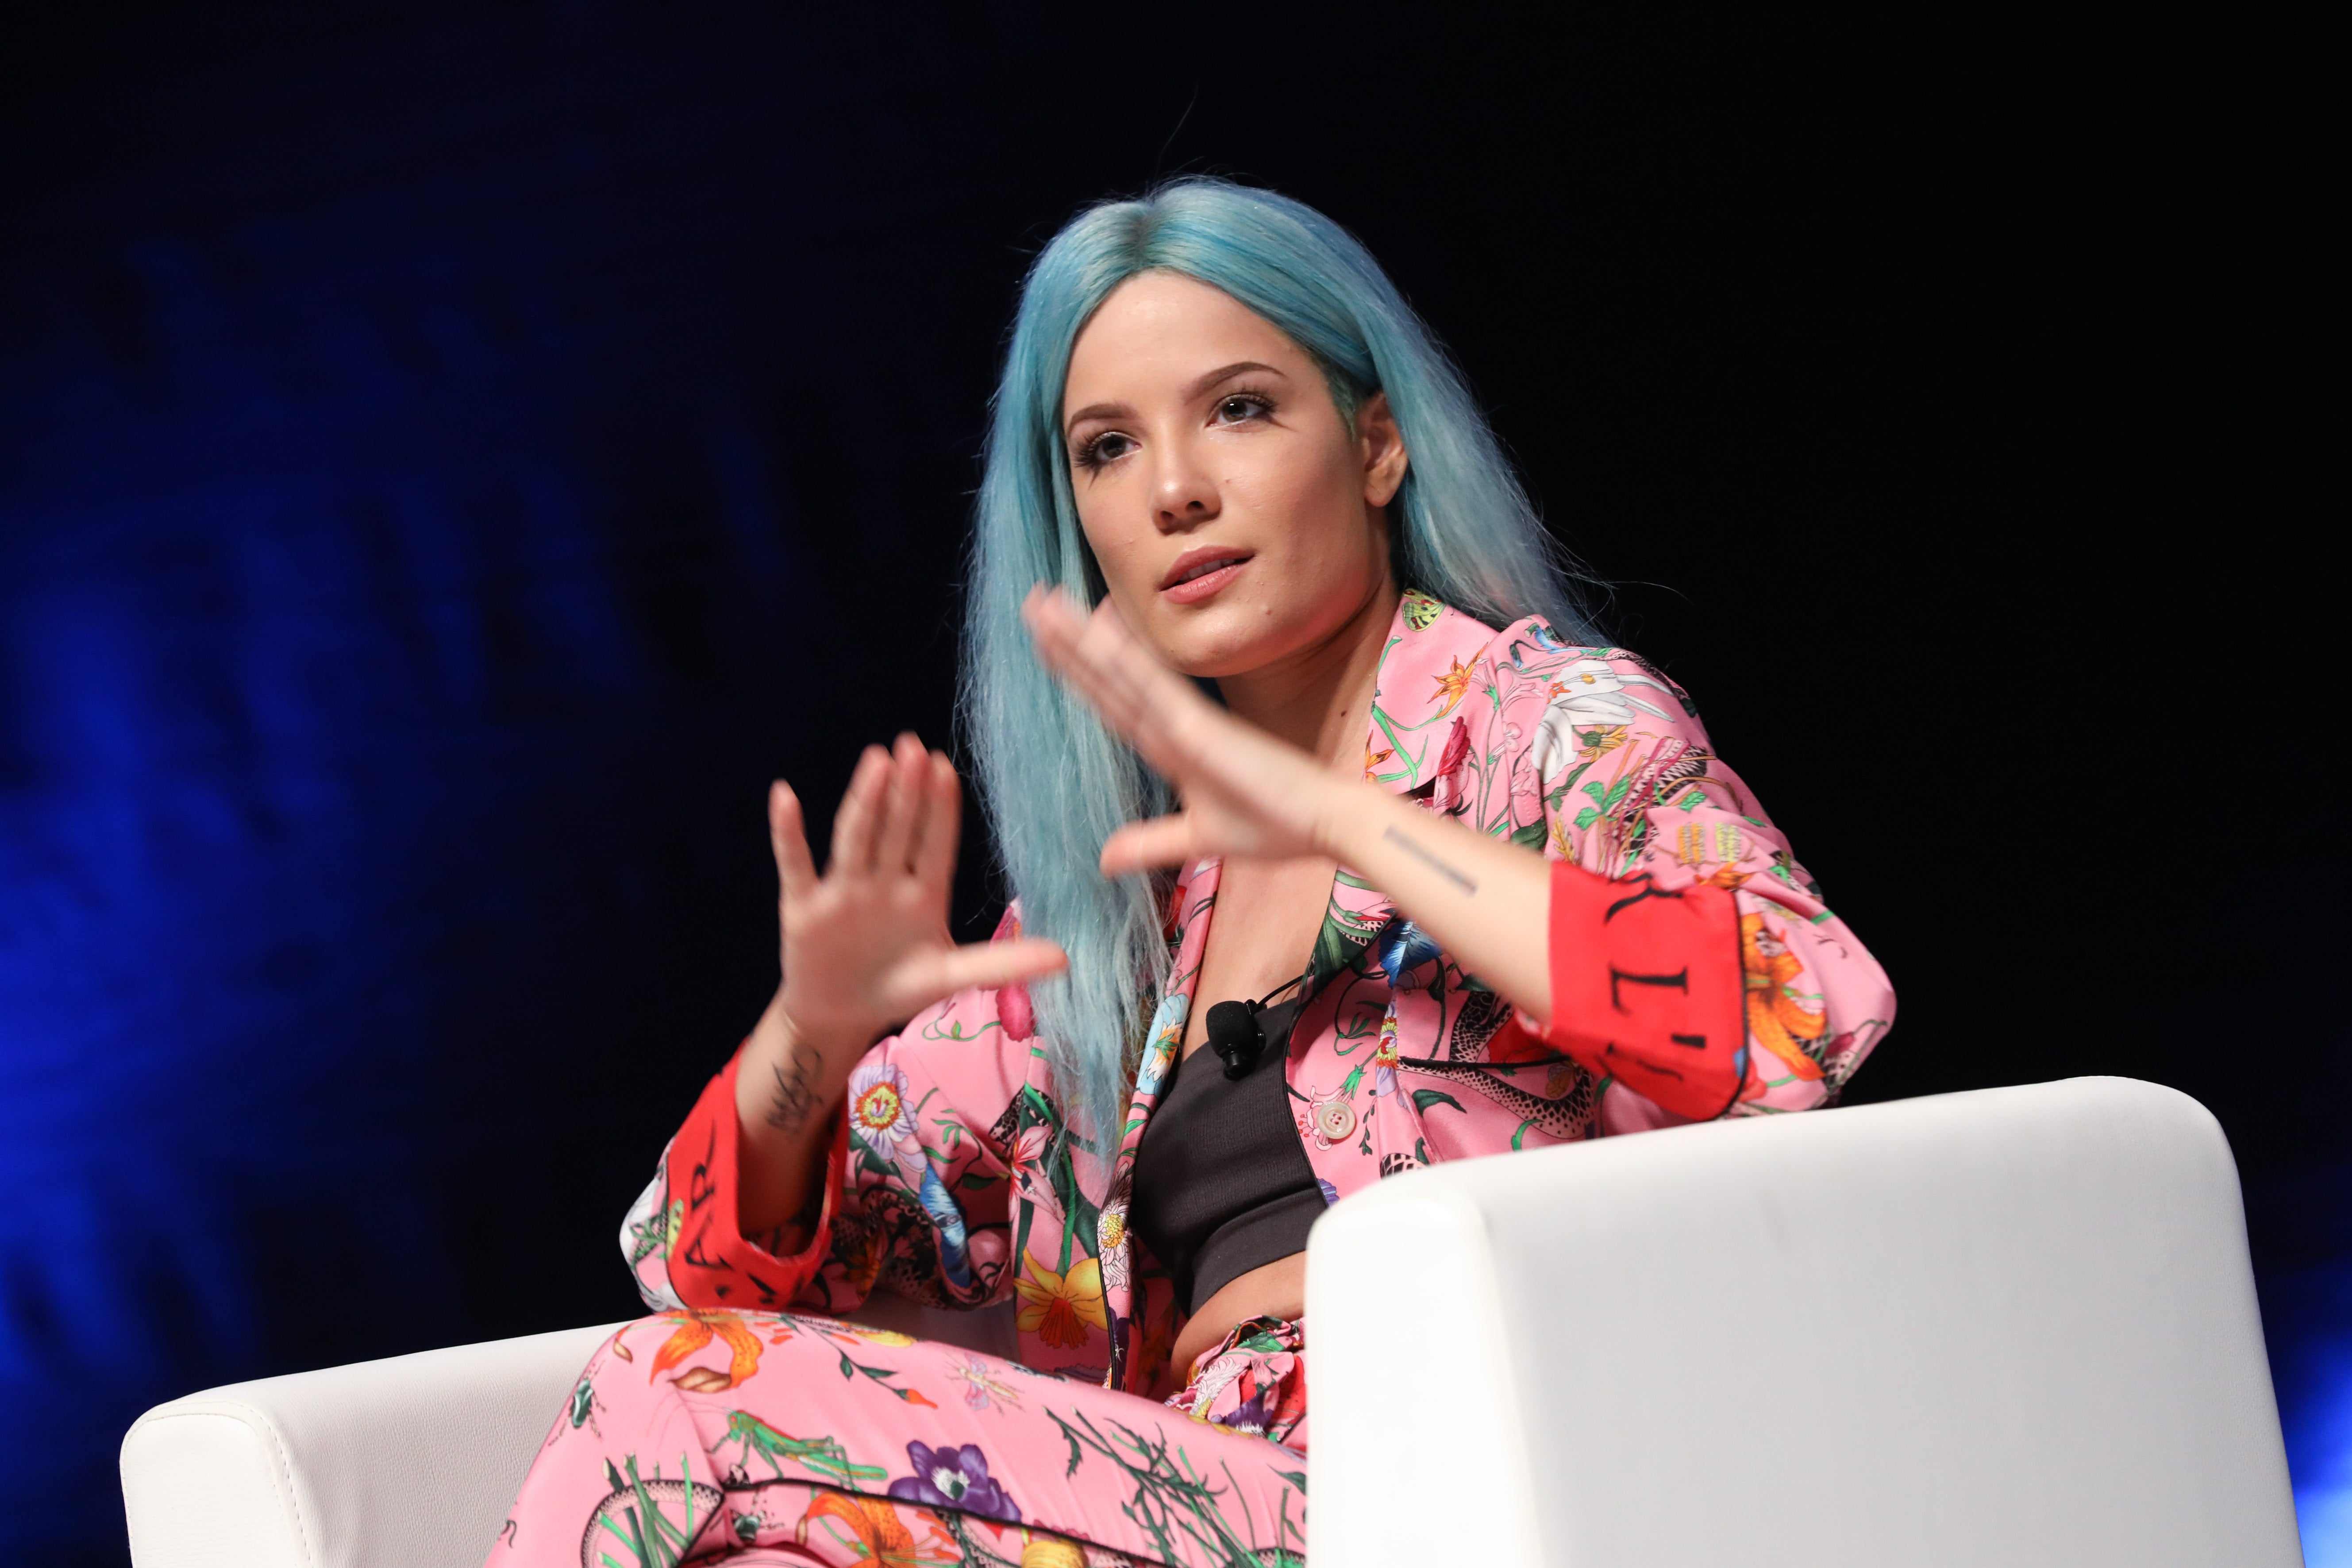 'I Look Like A White Girl, But Don’t Feel Like One': Halsey On Identifying As A Black Woman